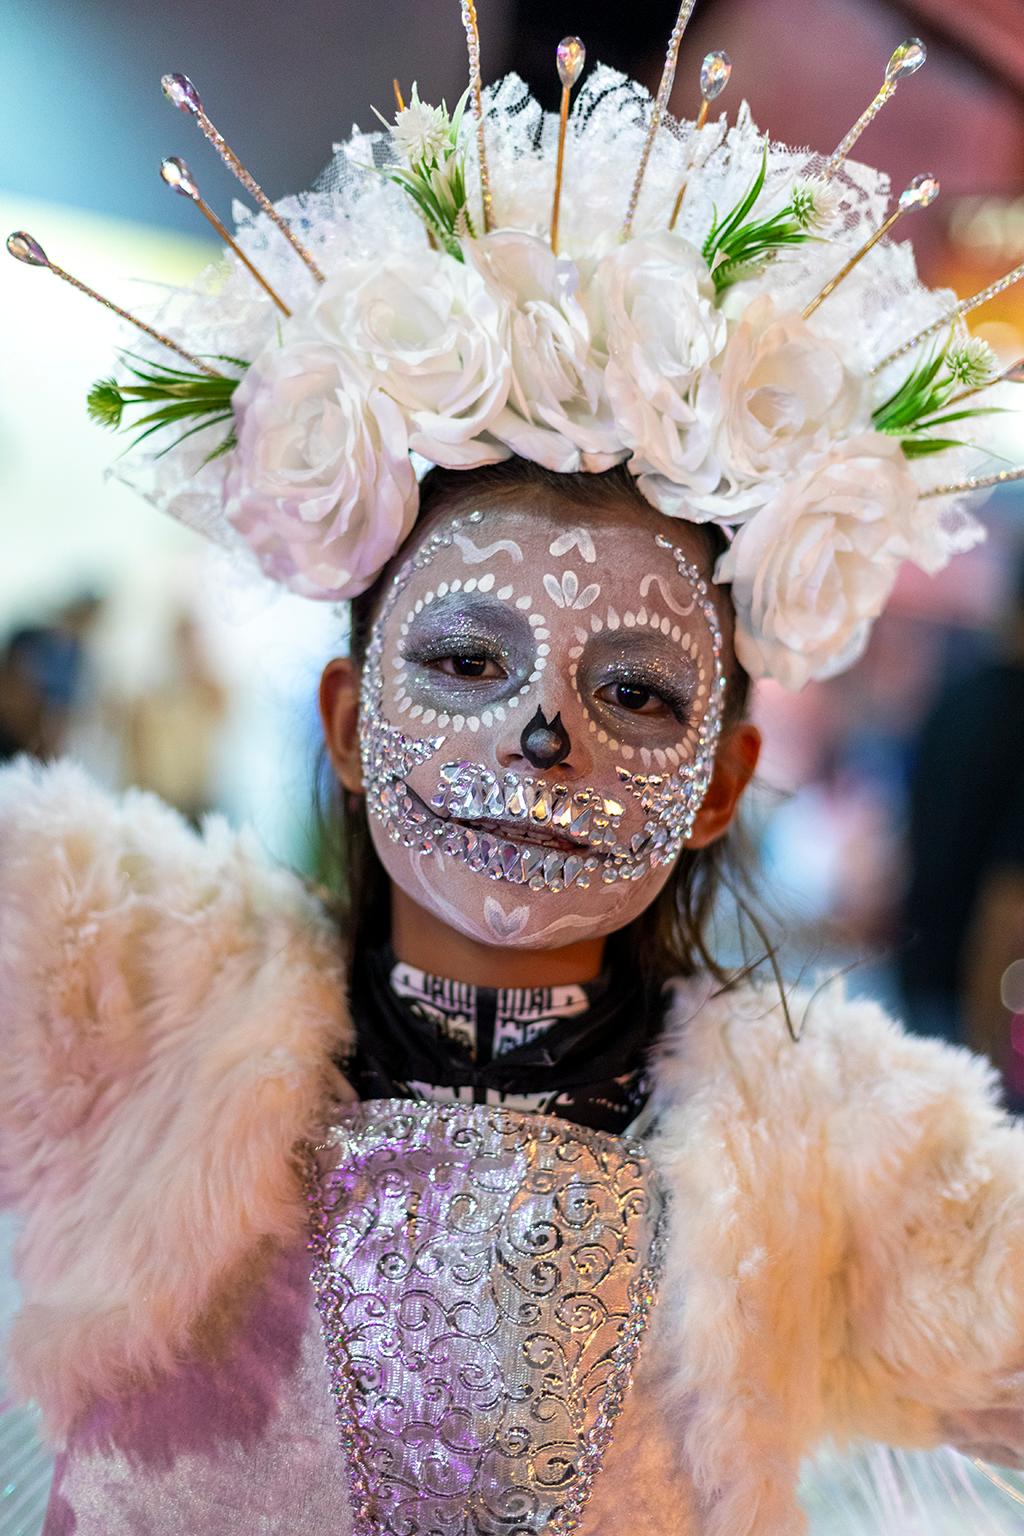  Cosmo Condina Color Photograph - Young Girl Dressed for Day of the Dead, Dia de los Muertos, Isla Mujeres, Mexico